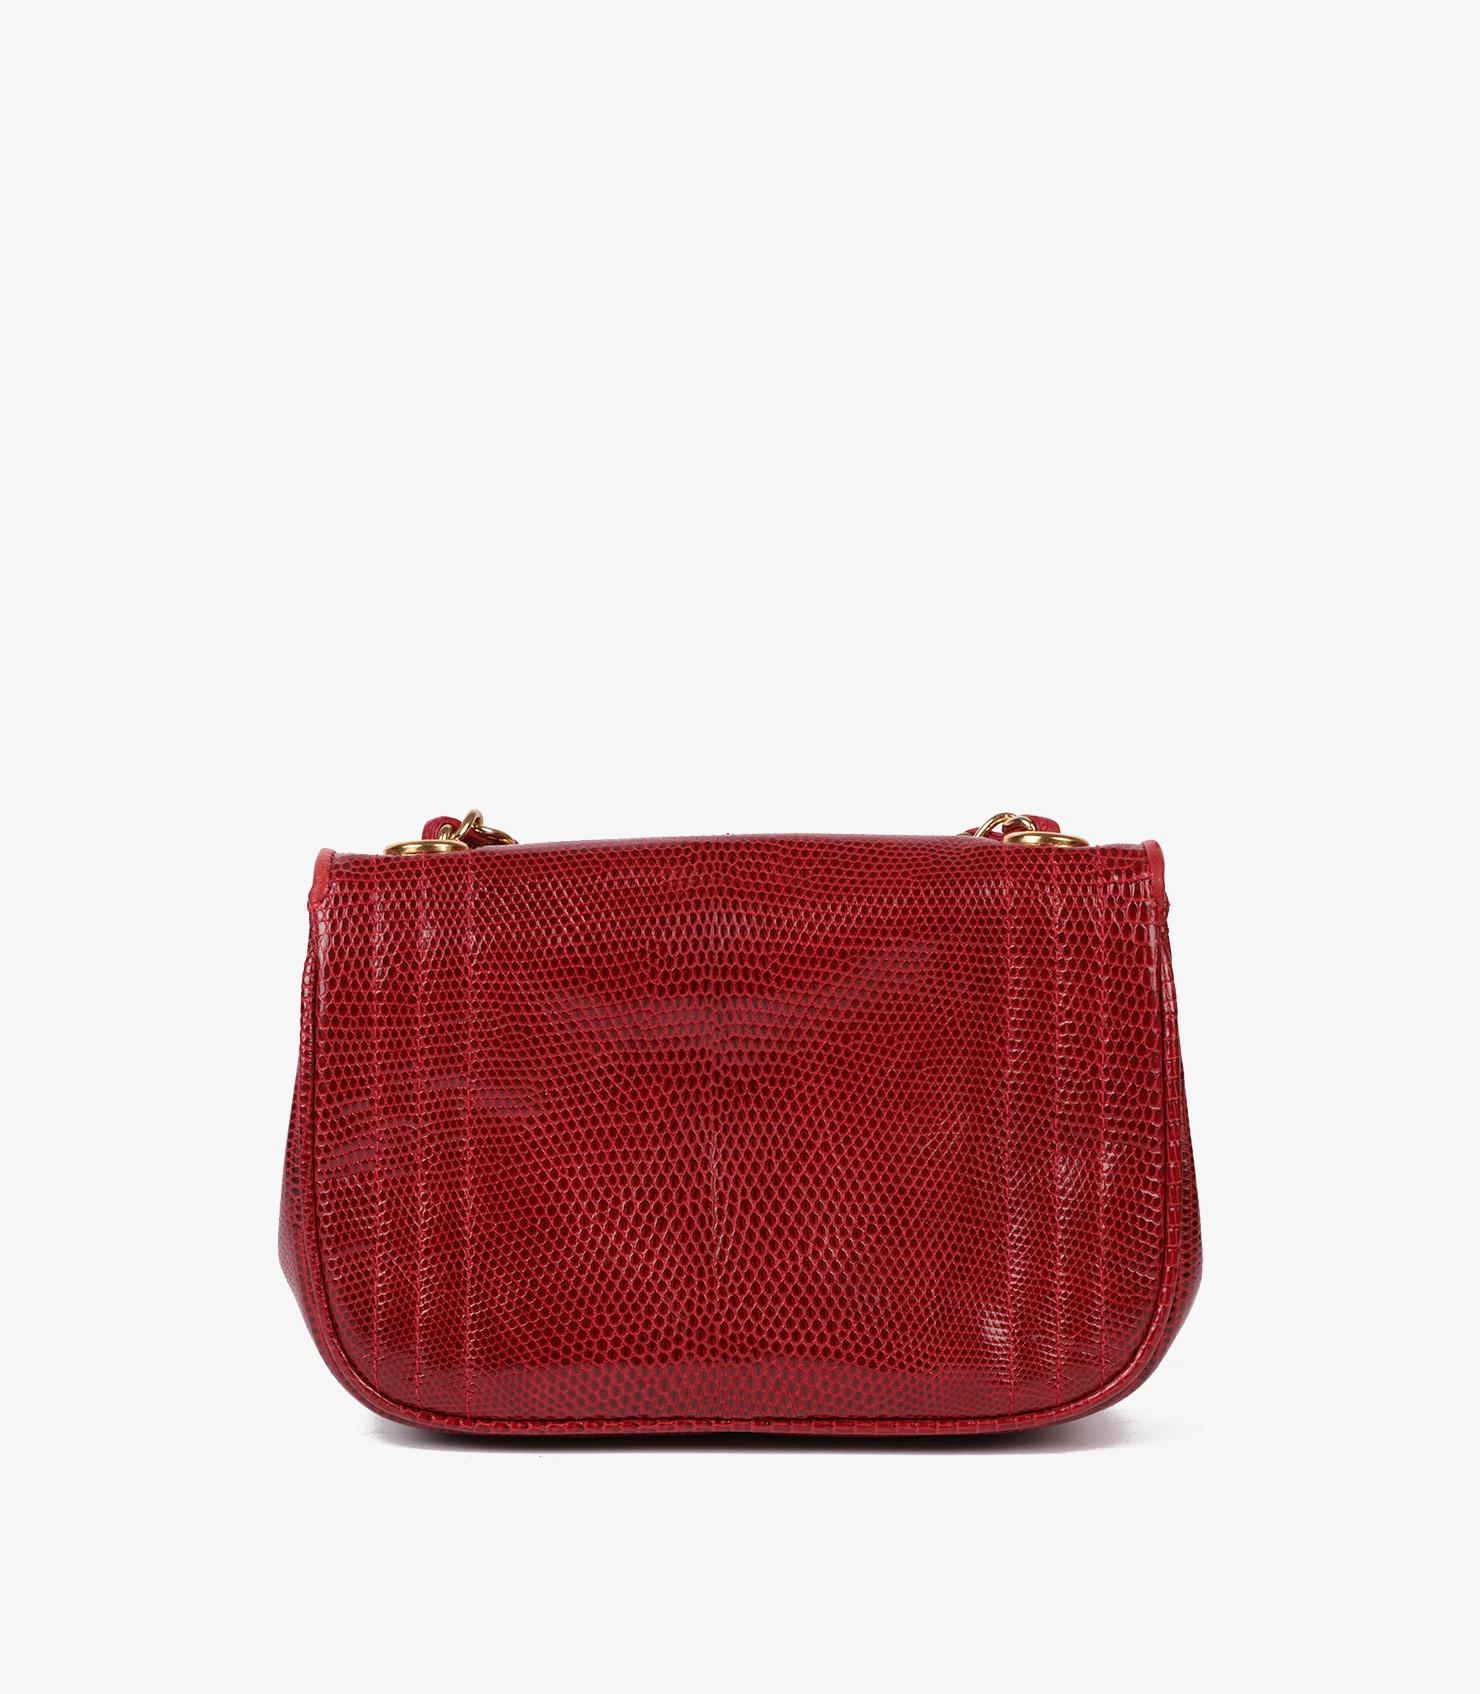 Chanel Red Lizard Leather Vintage Timeless Mini Flap Bag For Sale 1